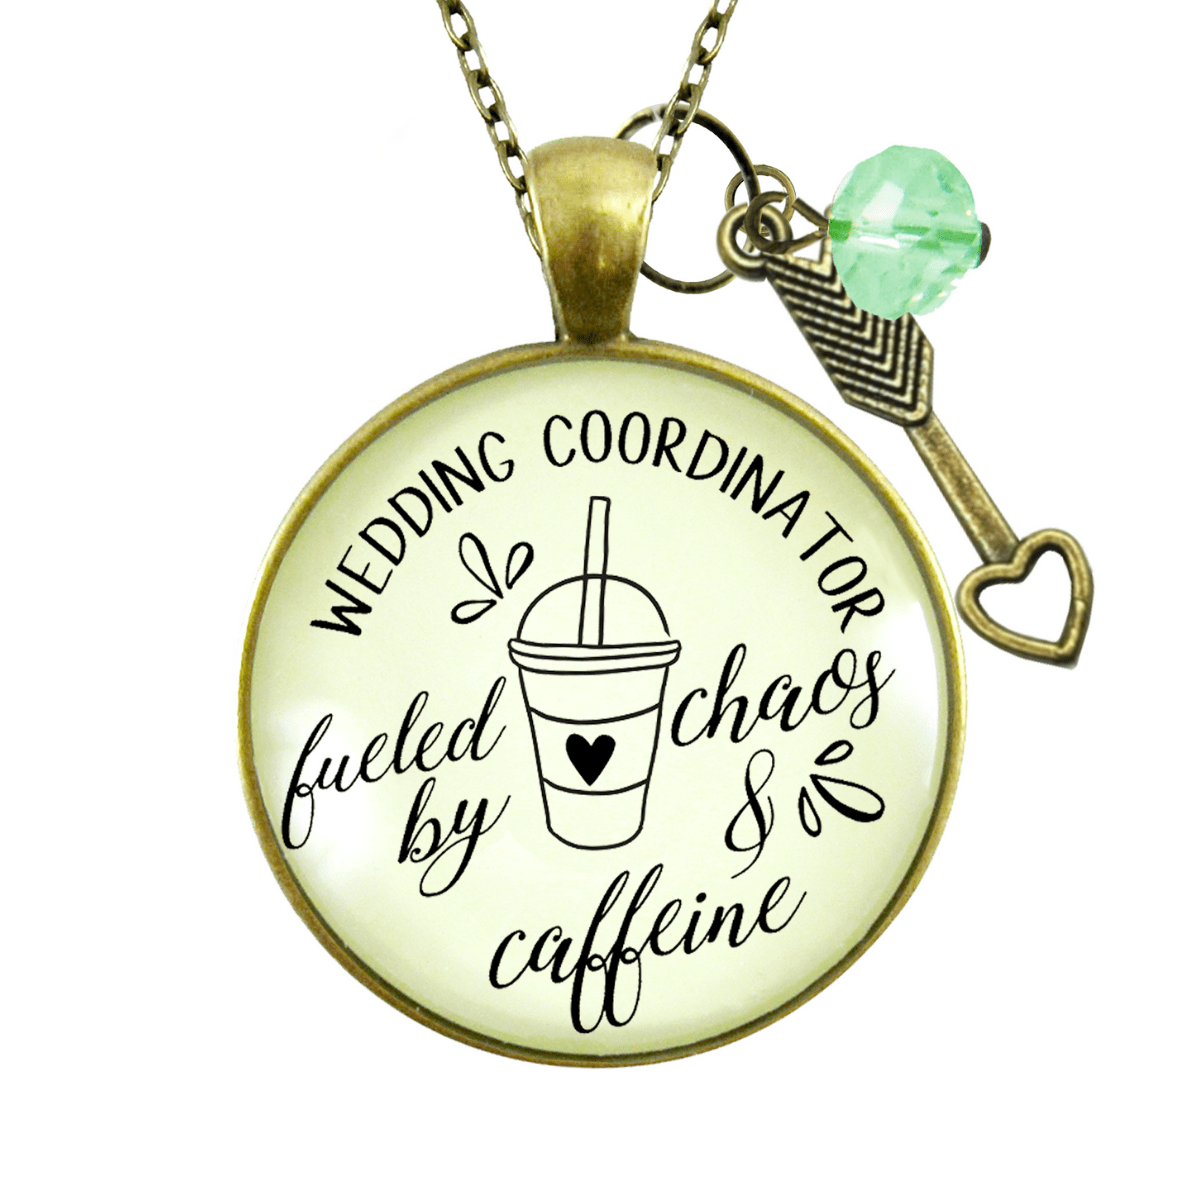 Gutsy Goodness Wedding Coordinator Necklace Fueled by Chaos Caffeine Thank You Gift - Gutsy Goodness Handmade Jewelry;Wedding Coordinator Necklace Fueled By Chaos Caffeine Thank You Gift - Gutsy Goodness Handmade Jewelry Gifts